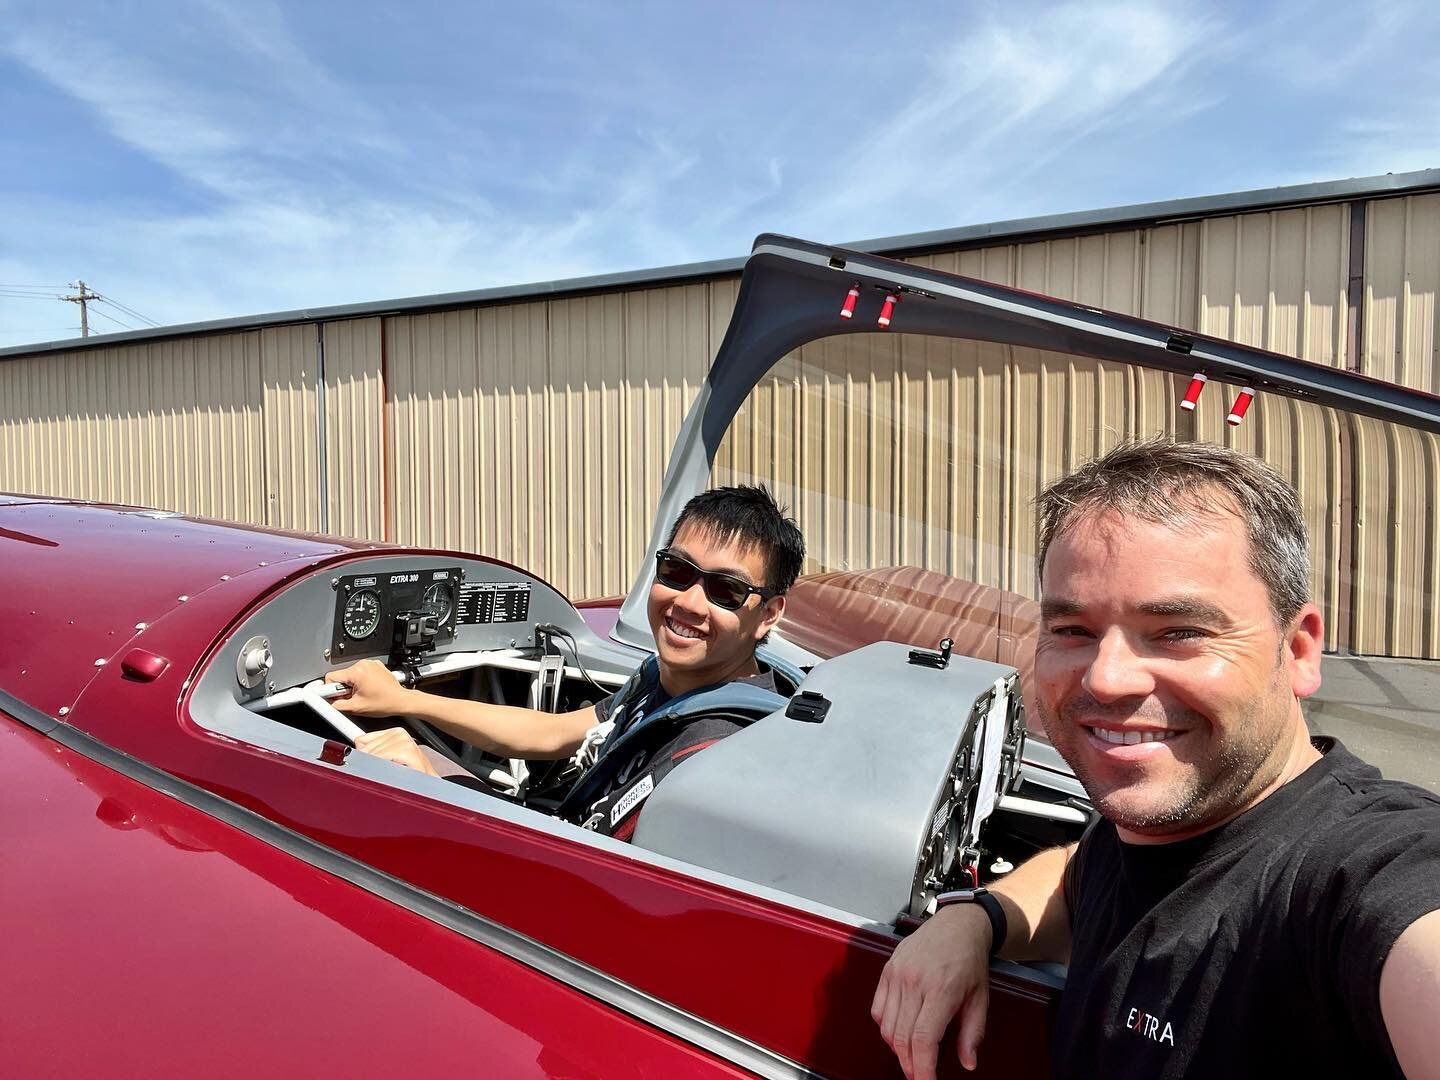 What a perfect Tuesday to go upside down and give Edgar a BFR!  #mpaviation #liftaviationusa #flycoolshit #invertedaviation #extraaircraft #extra300 #fly #flying #airplane #airplanesarecool #instapilot #pilot #photo #instaphoto #insta #letsgo #bluesk